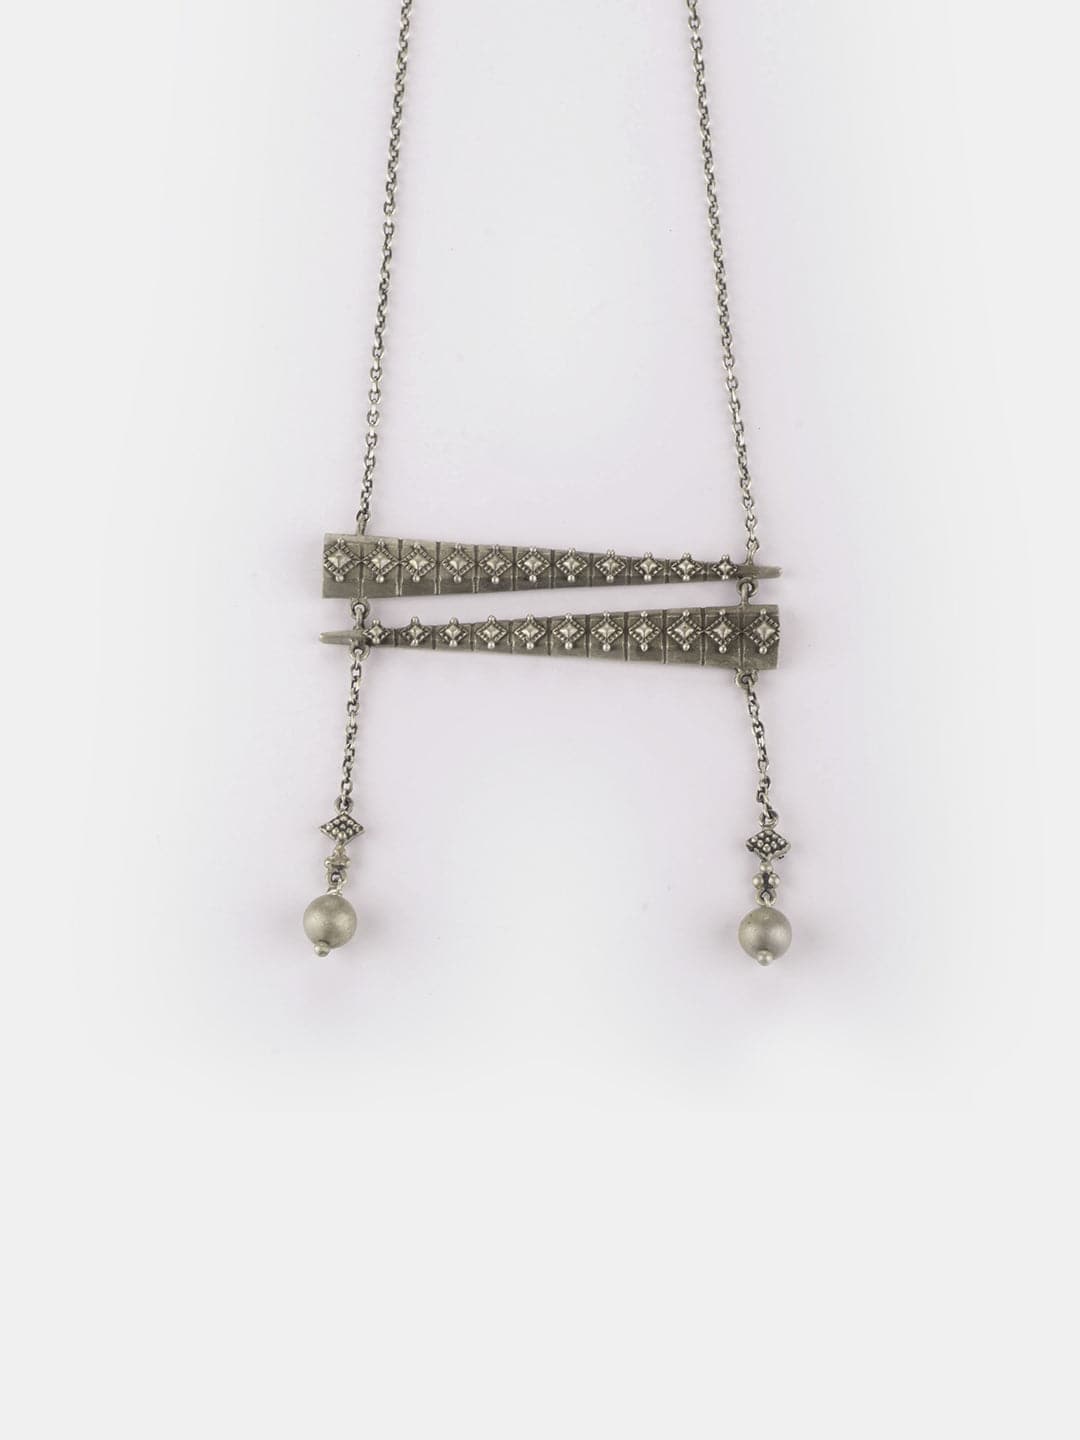 Antique Dadis Club Lunch Necklace in 925 Silver